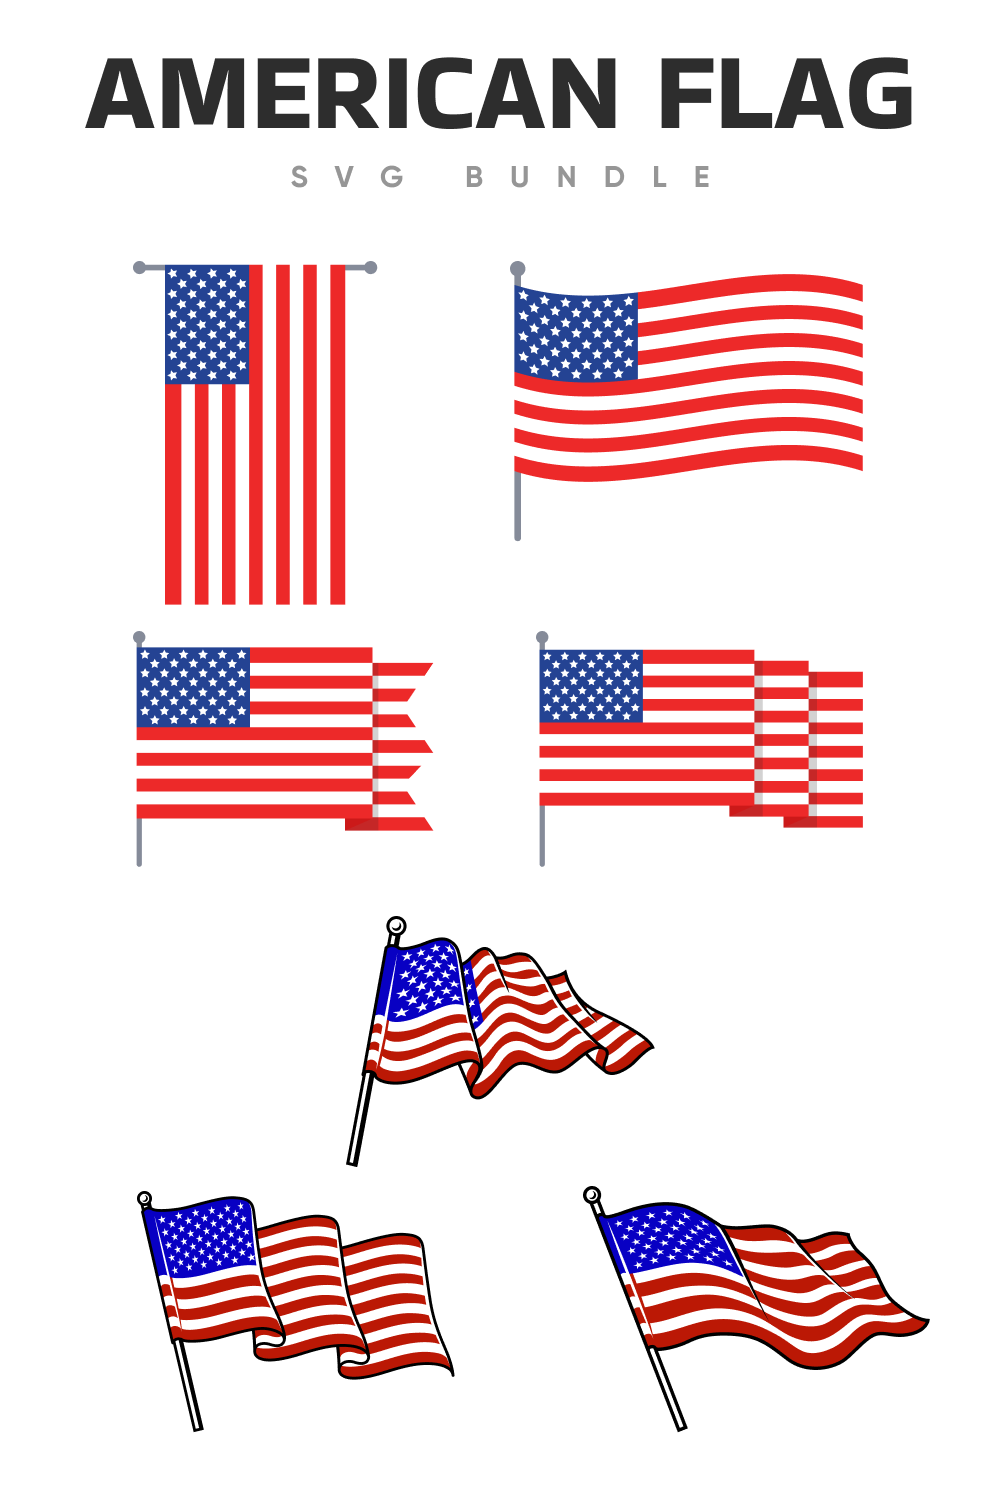 Diverse of the USA flags.